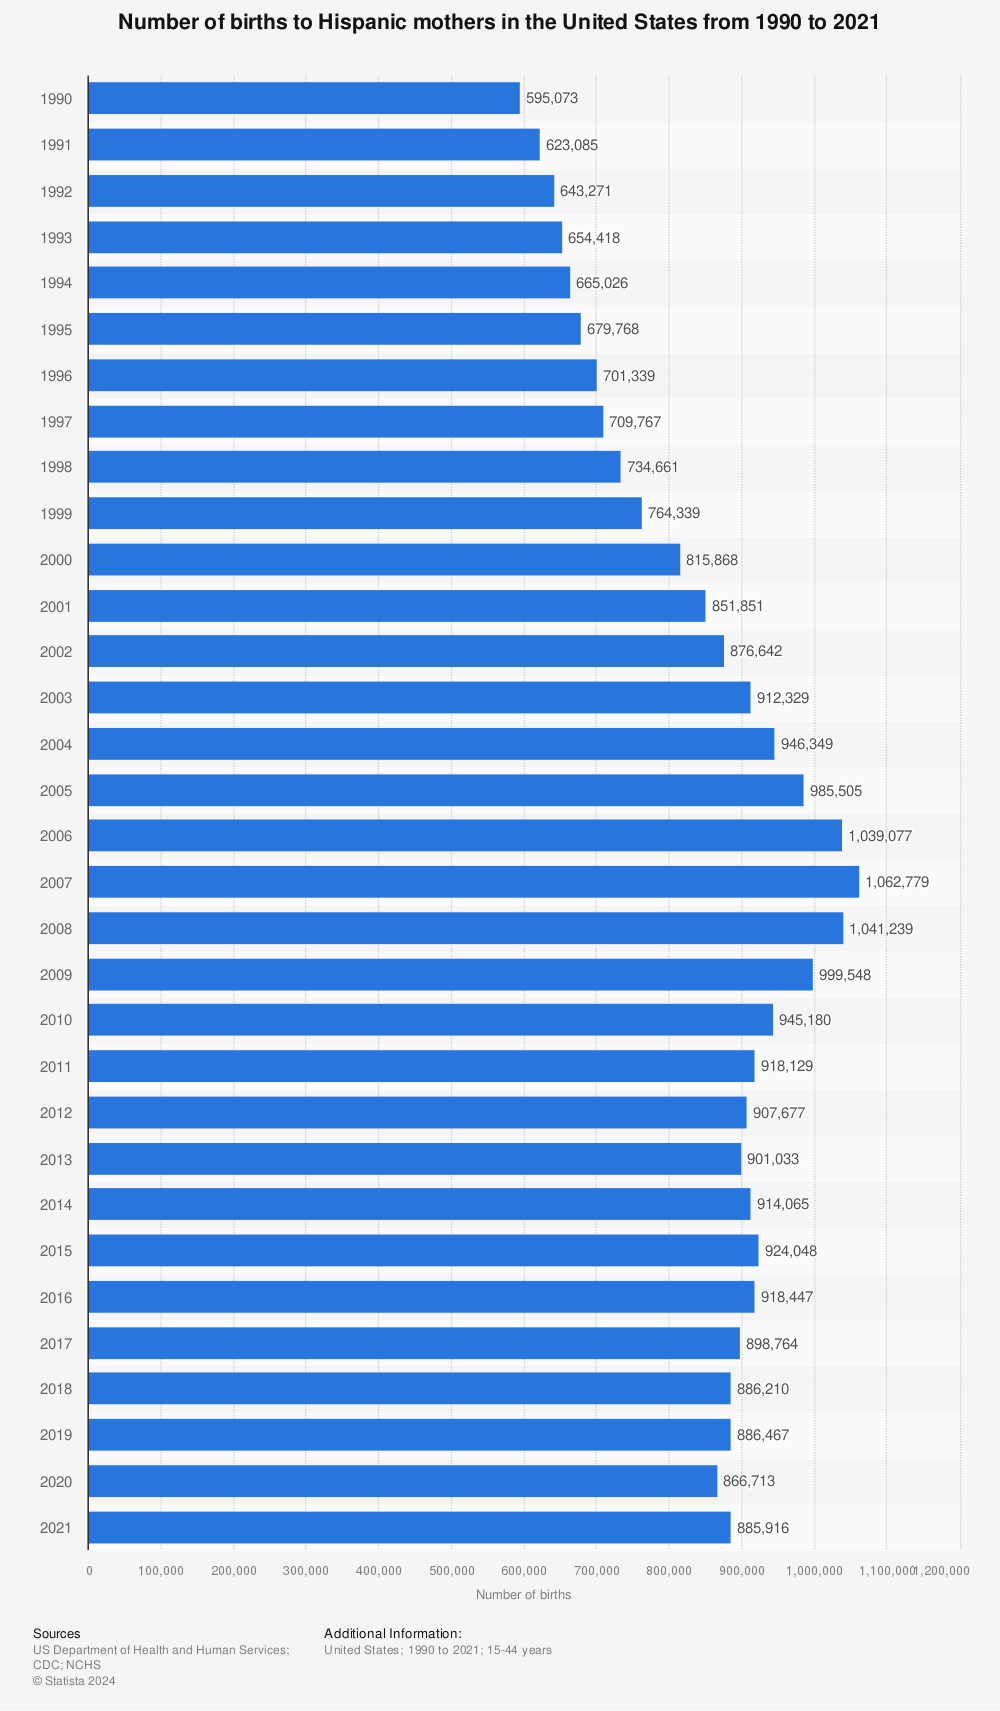 Statistic: Number of births to Hispanic mothers in the United States from 1990 to 2020 | Statista